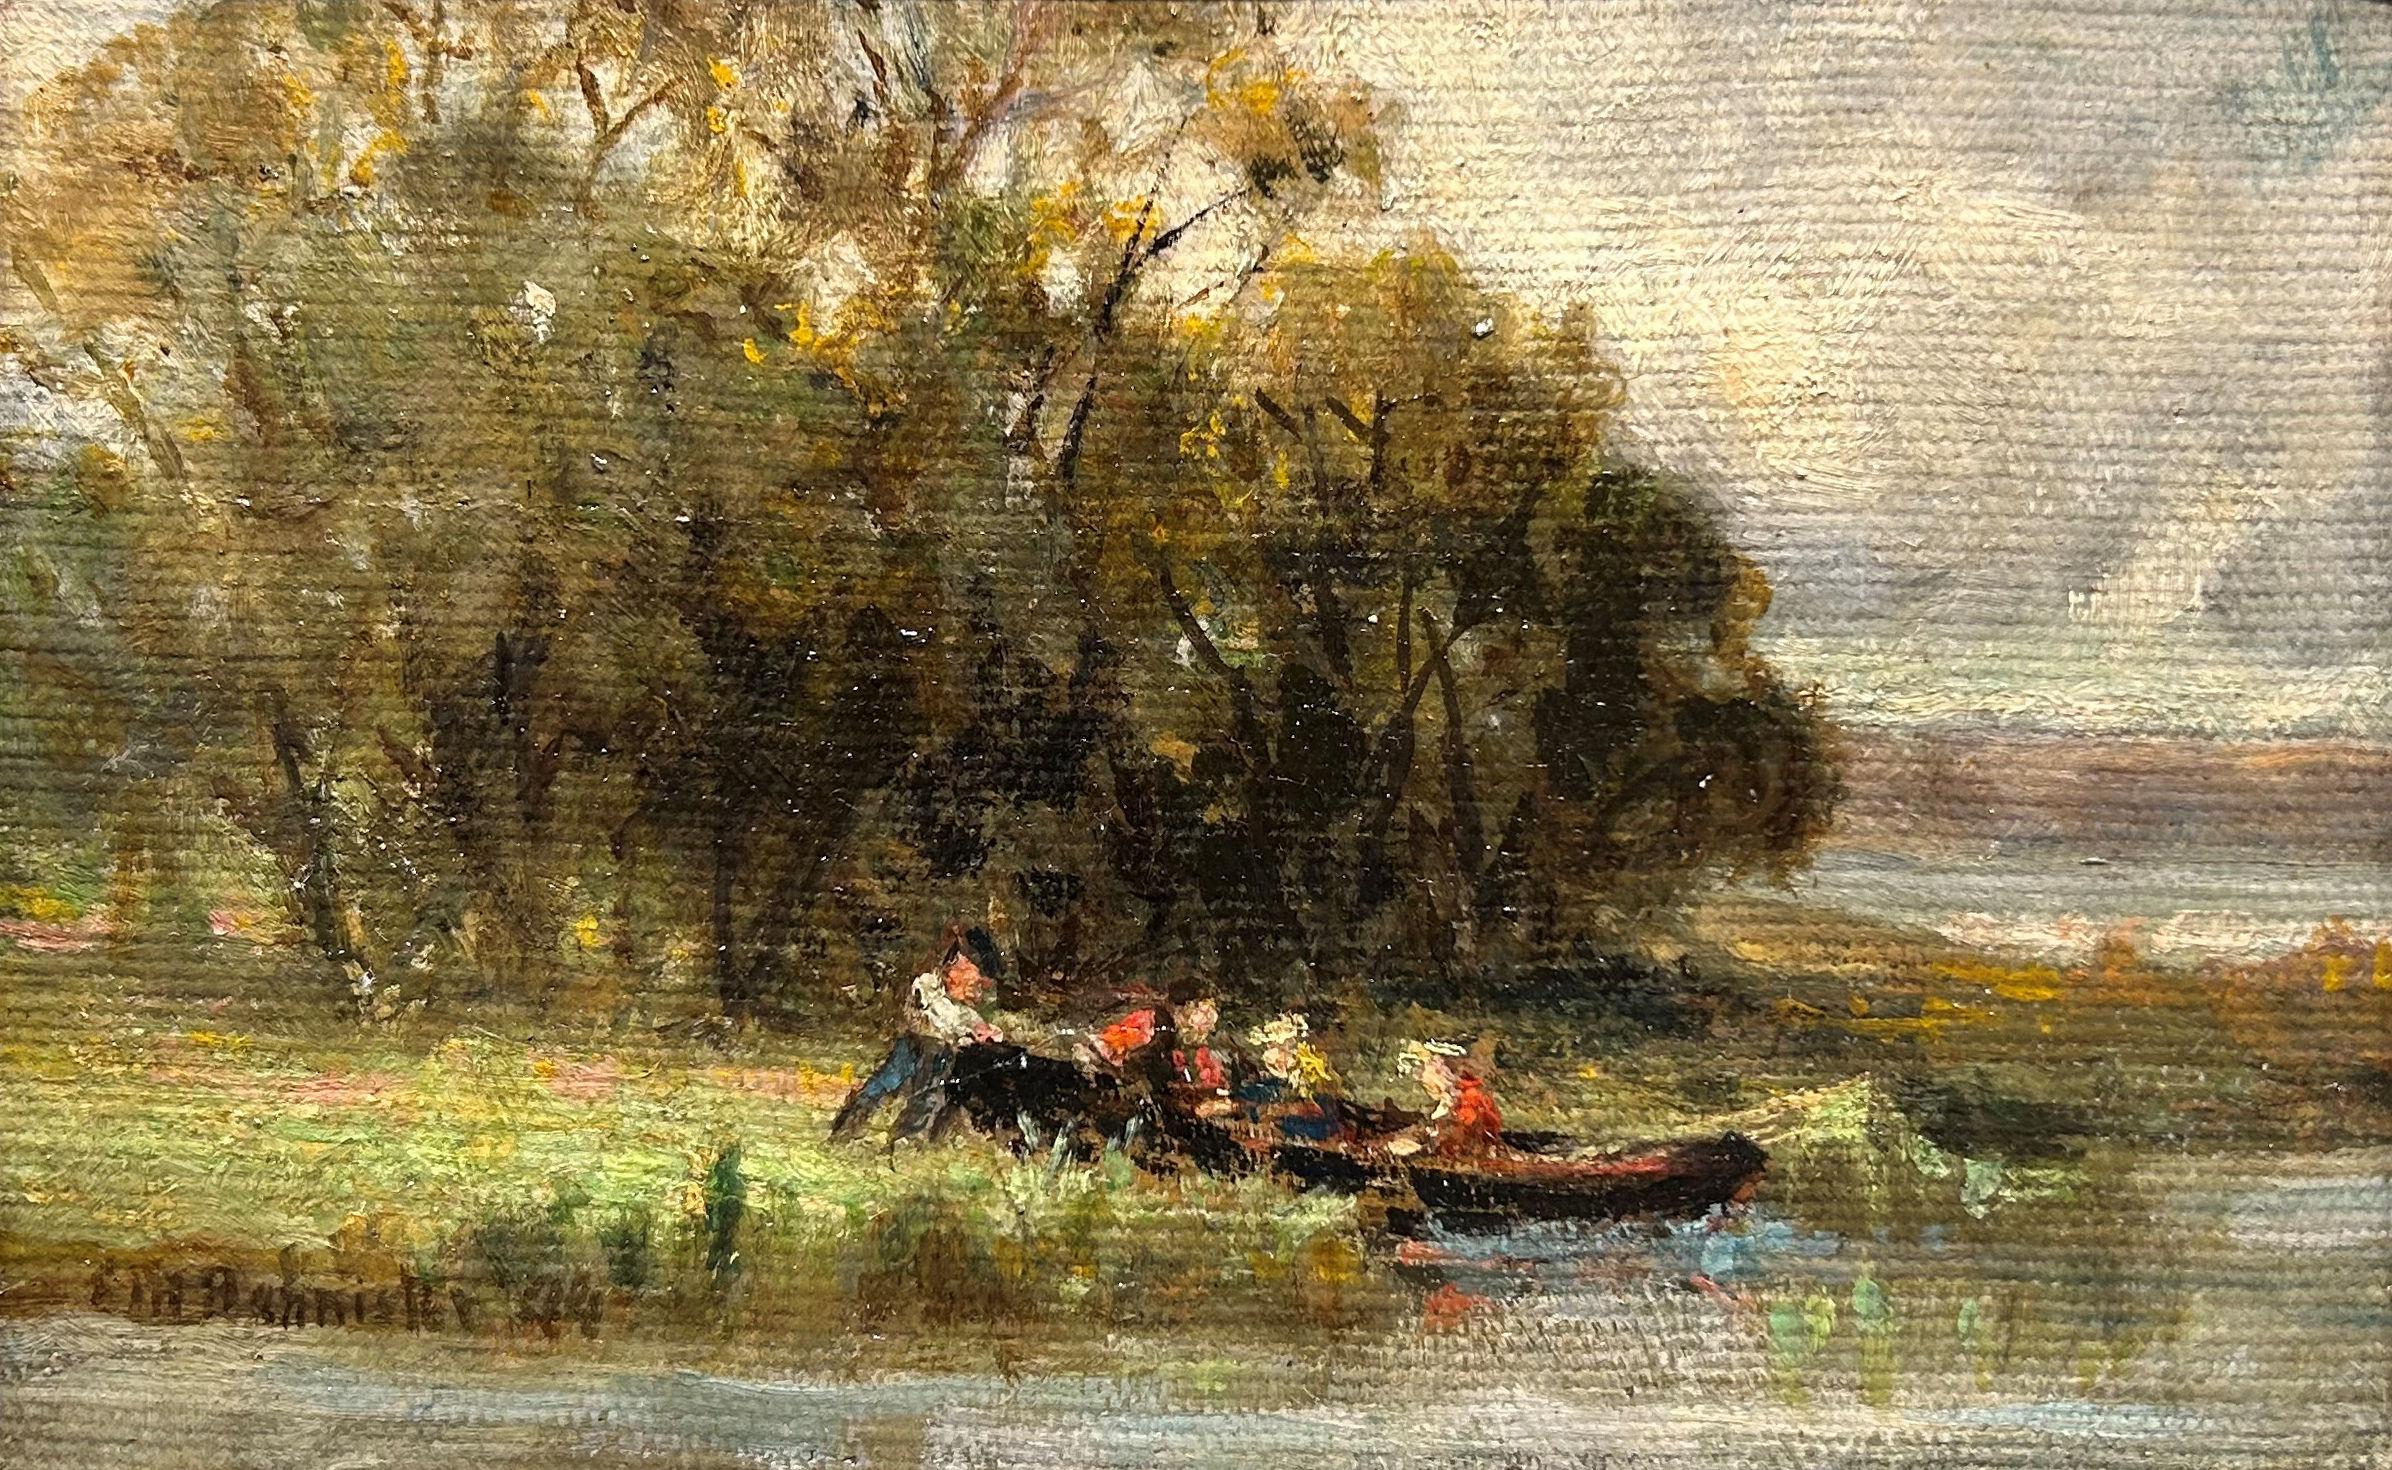 Edward Mitchell Bannister
Launching a Rowboat, 1884
Signed and dated lower left
Oil on canvas
5 x 8 inches

This work will be included in the forthcoming catalogue raisonne being prepared by Anne Louise Avery.

He was the best-known landscape